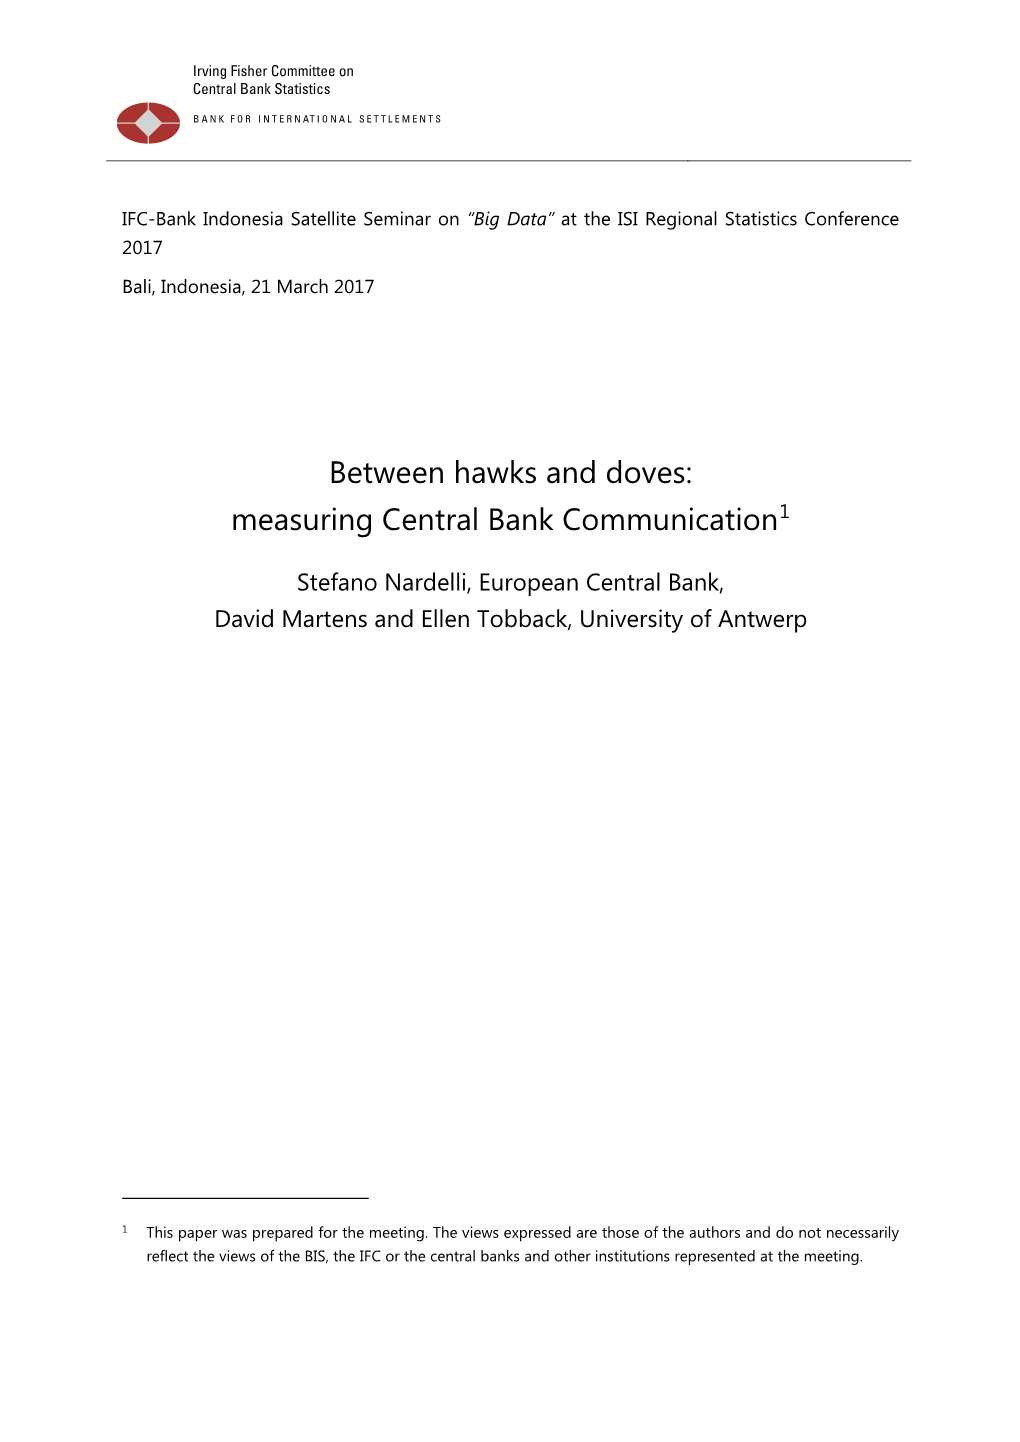 Between Hawks and Doves: Measuring Central Bank Communication1